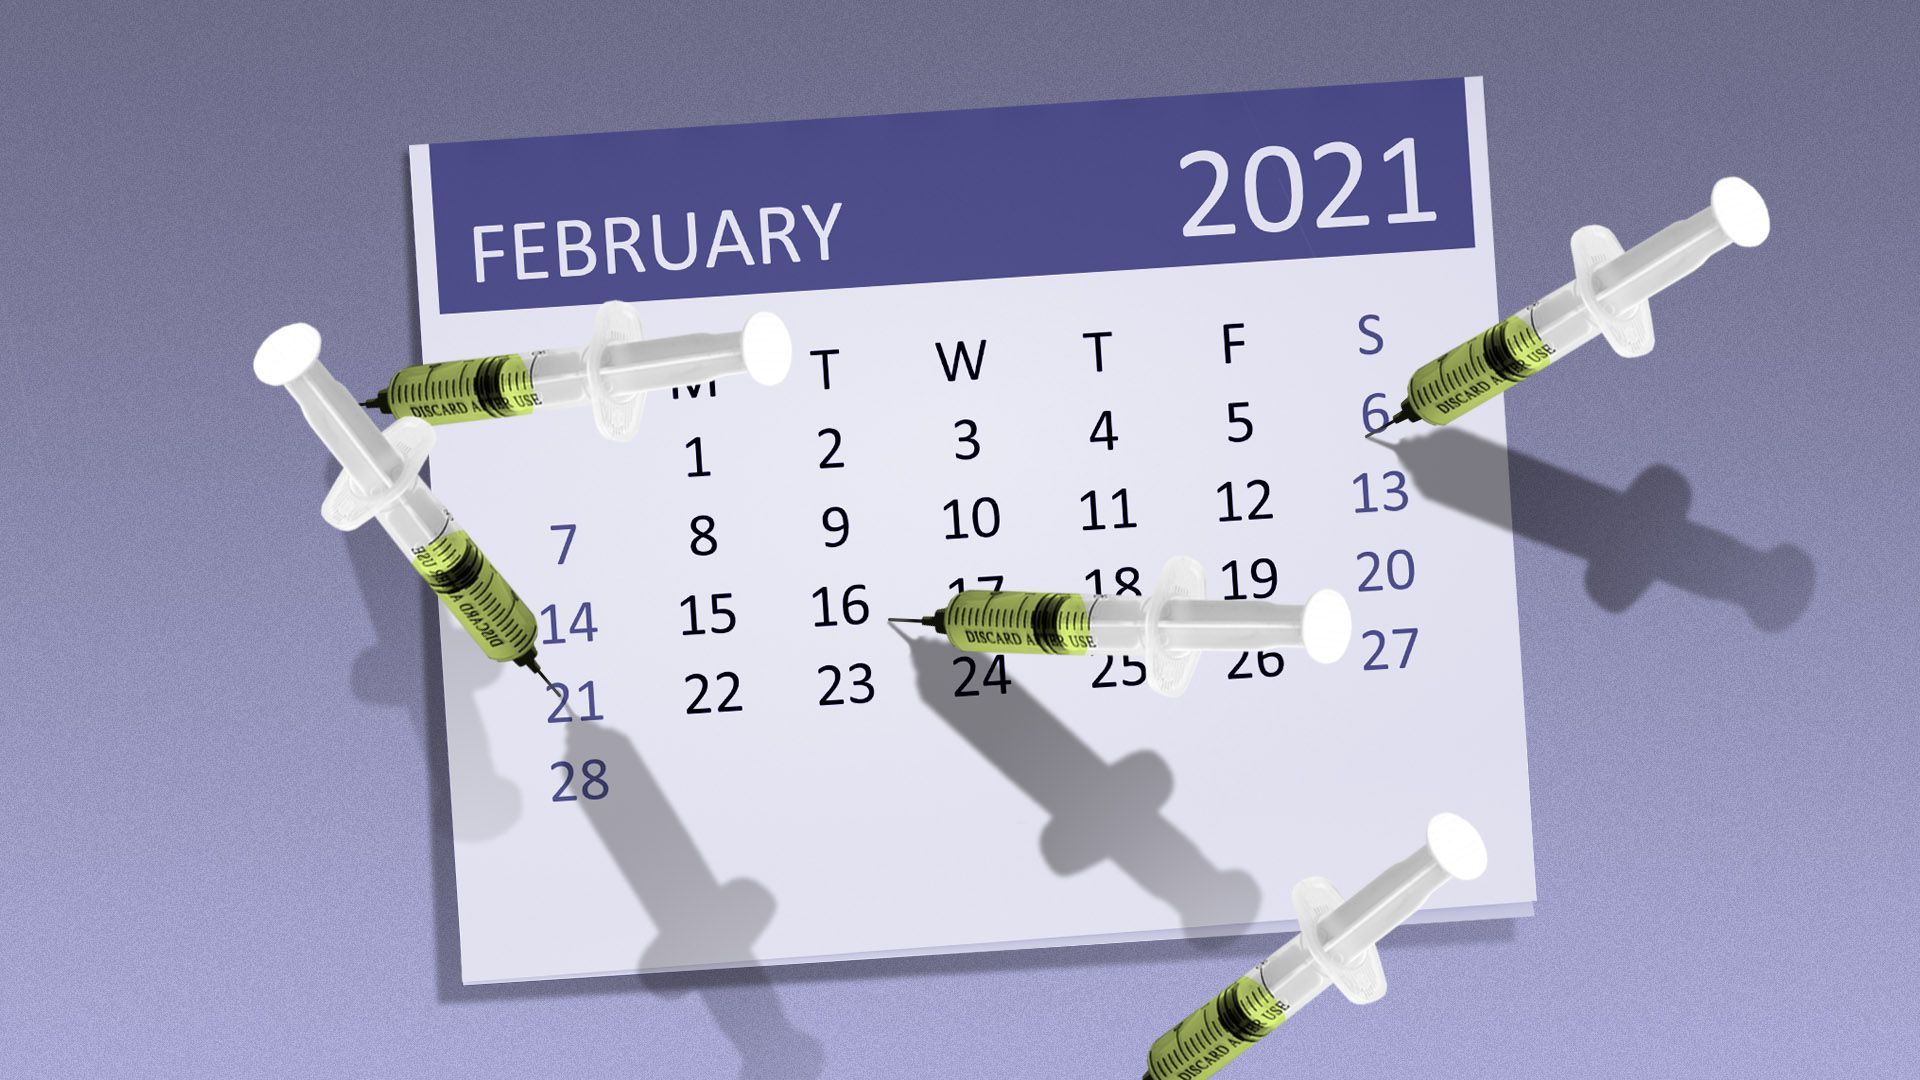 Illustration of a February 2021 calendar with syringes all over it